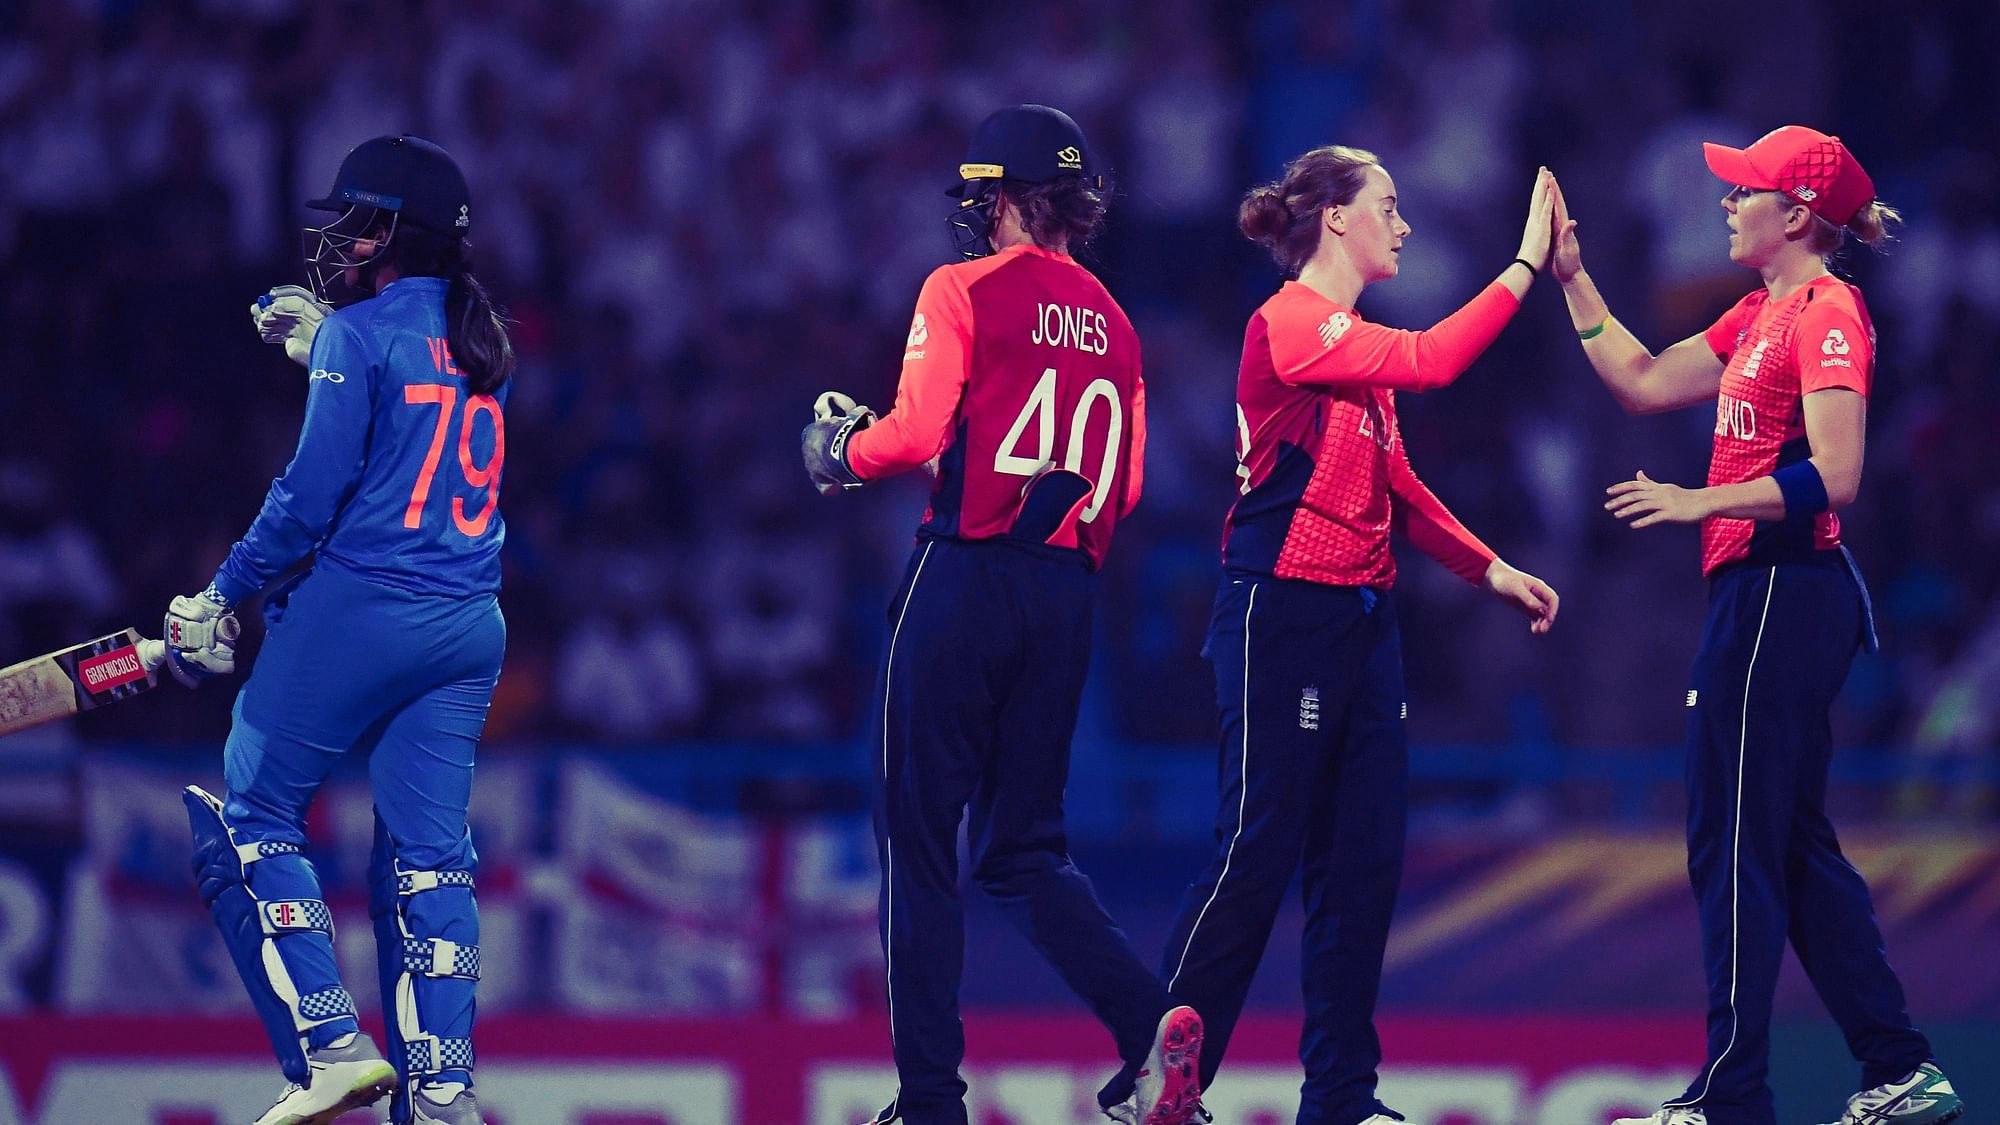 India were denied a maiden Women’s World T20 final berth by a dominant England at Antigua.